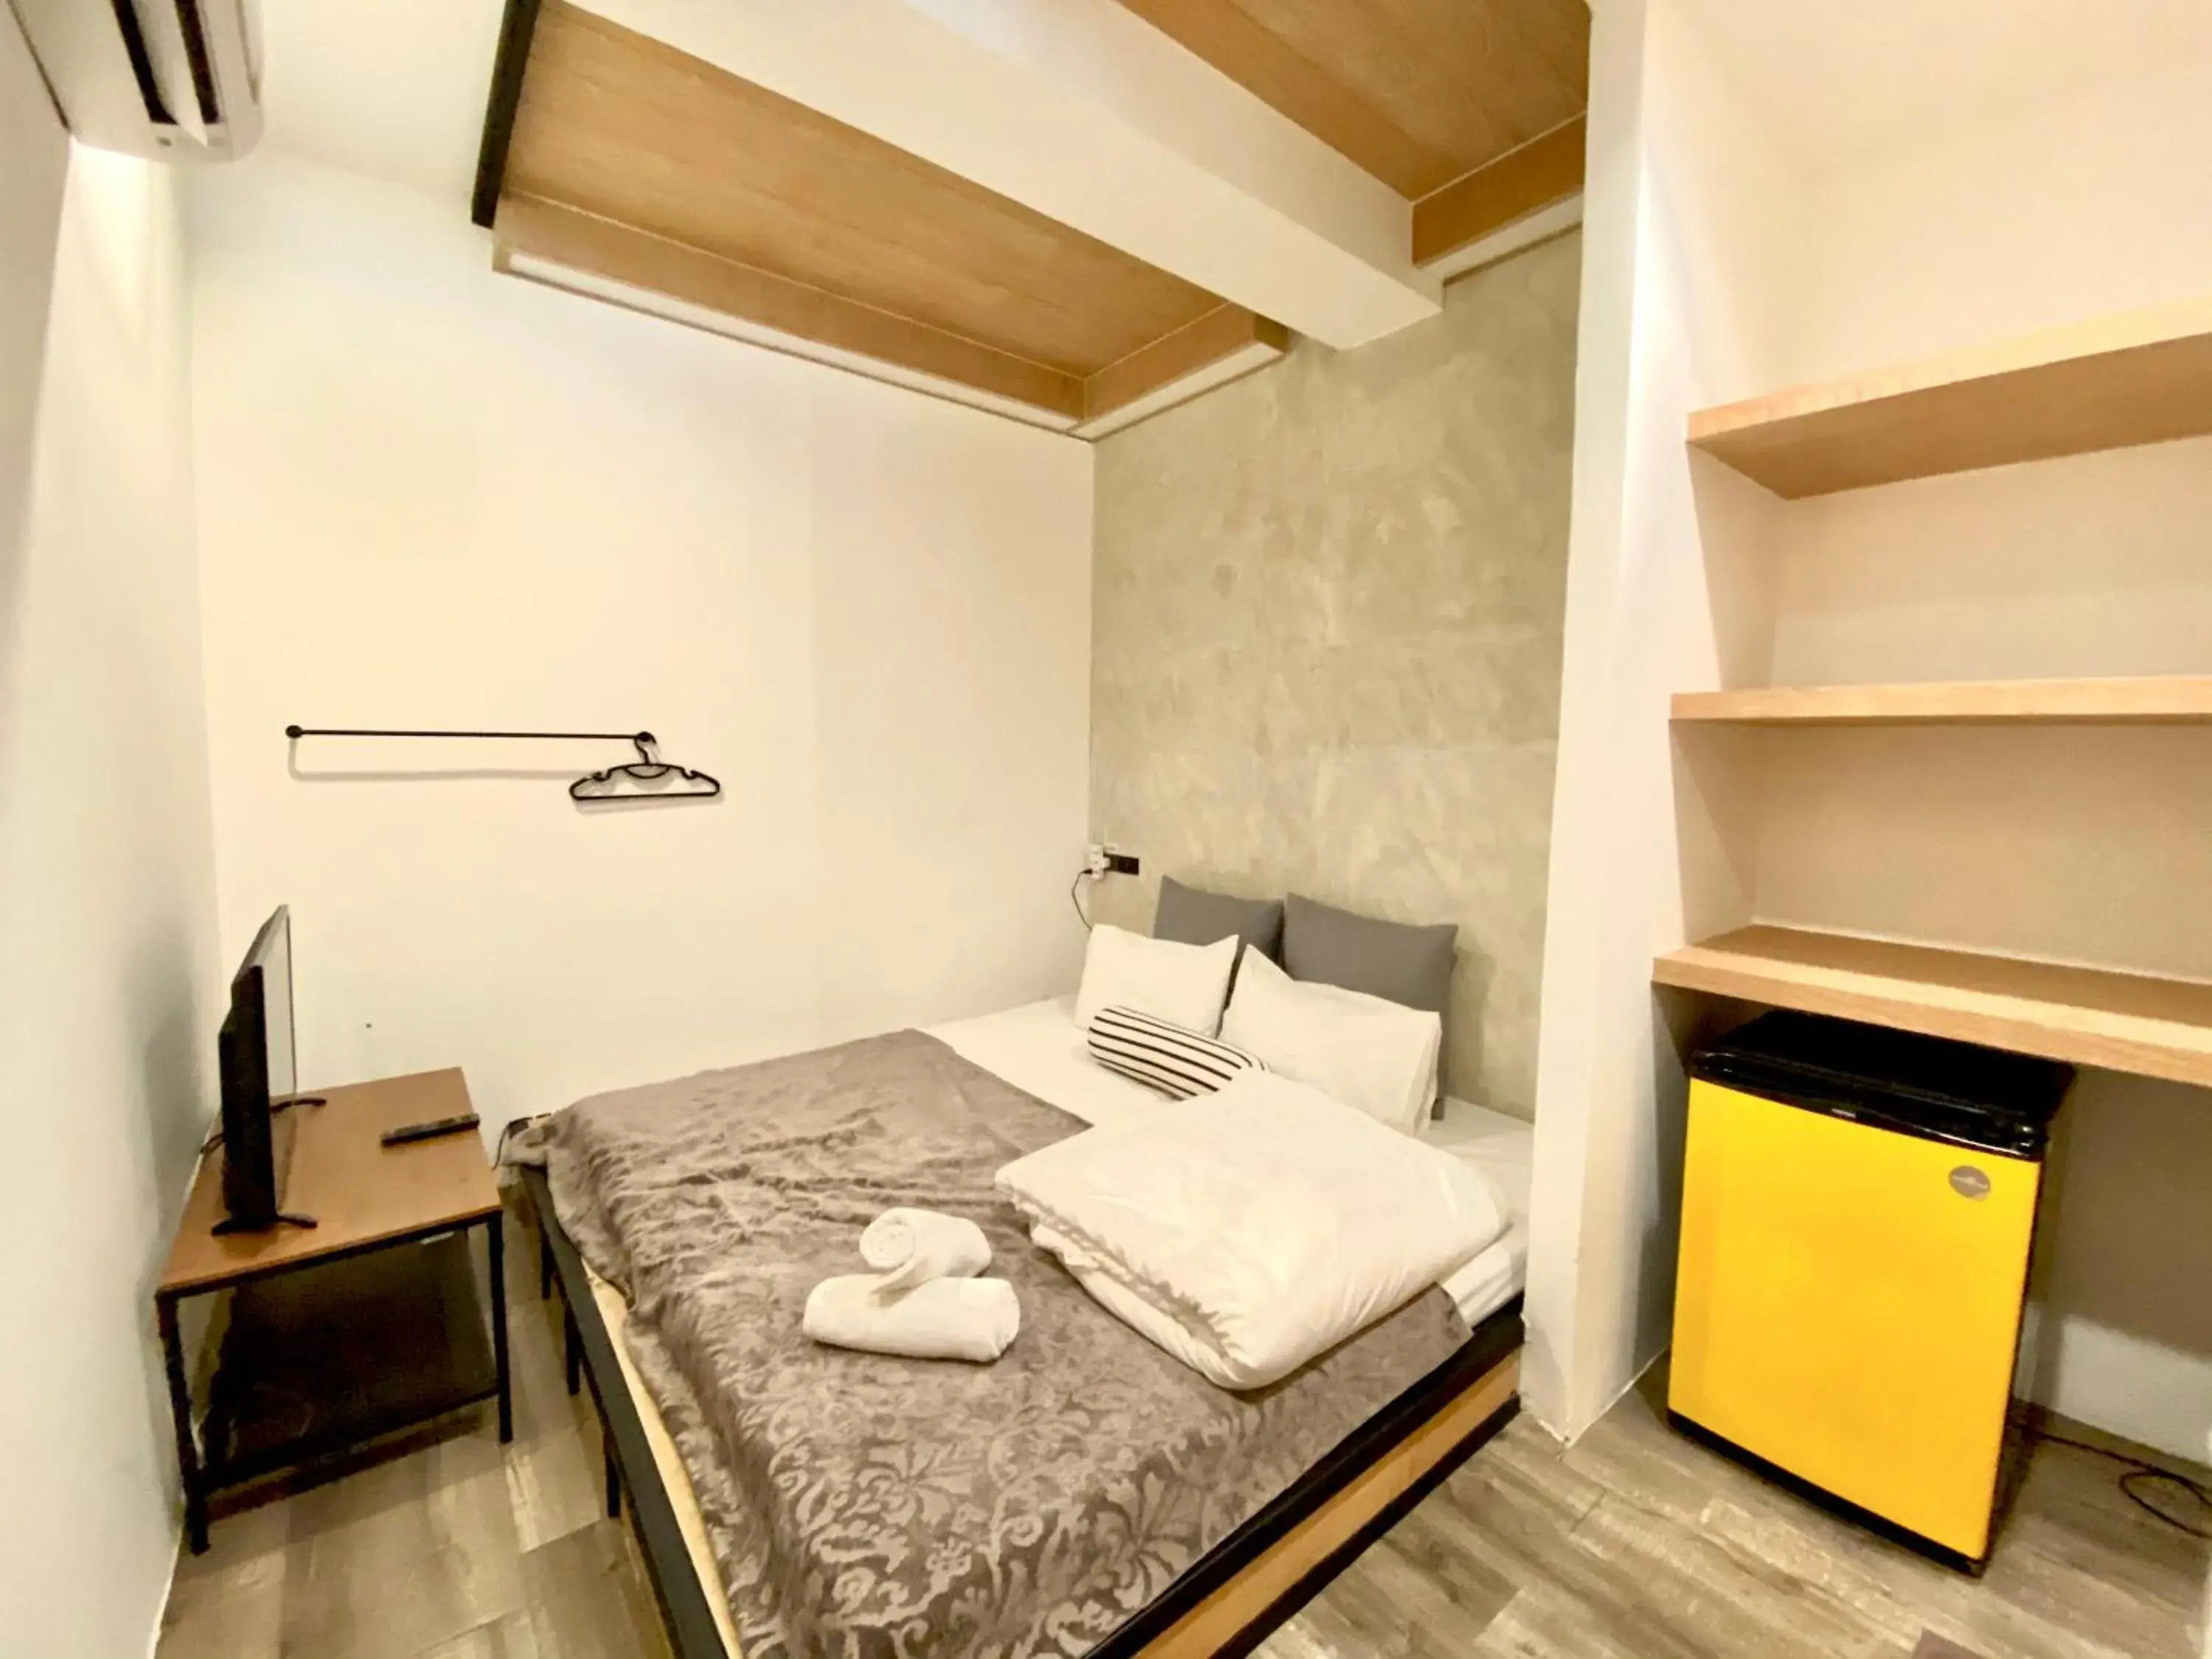 Bed in Vann Bangkok Boutique House